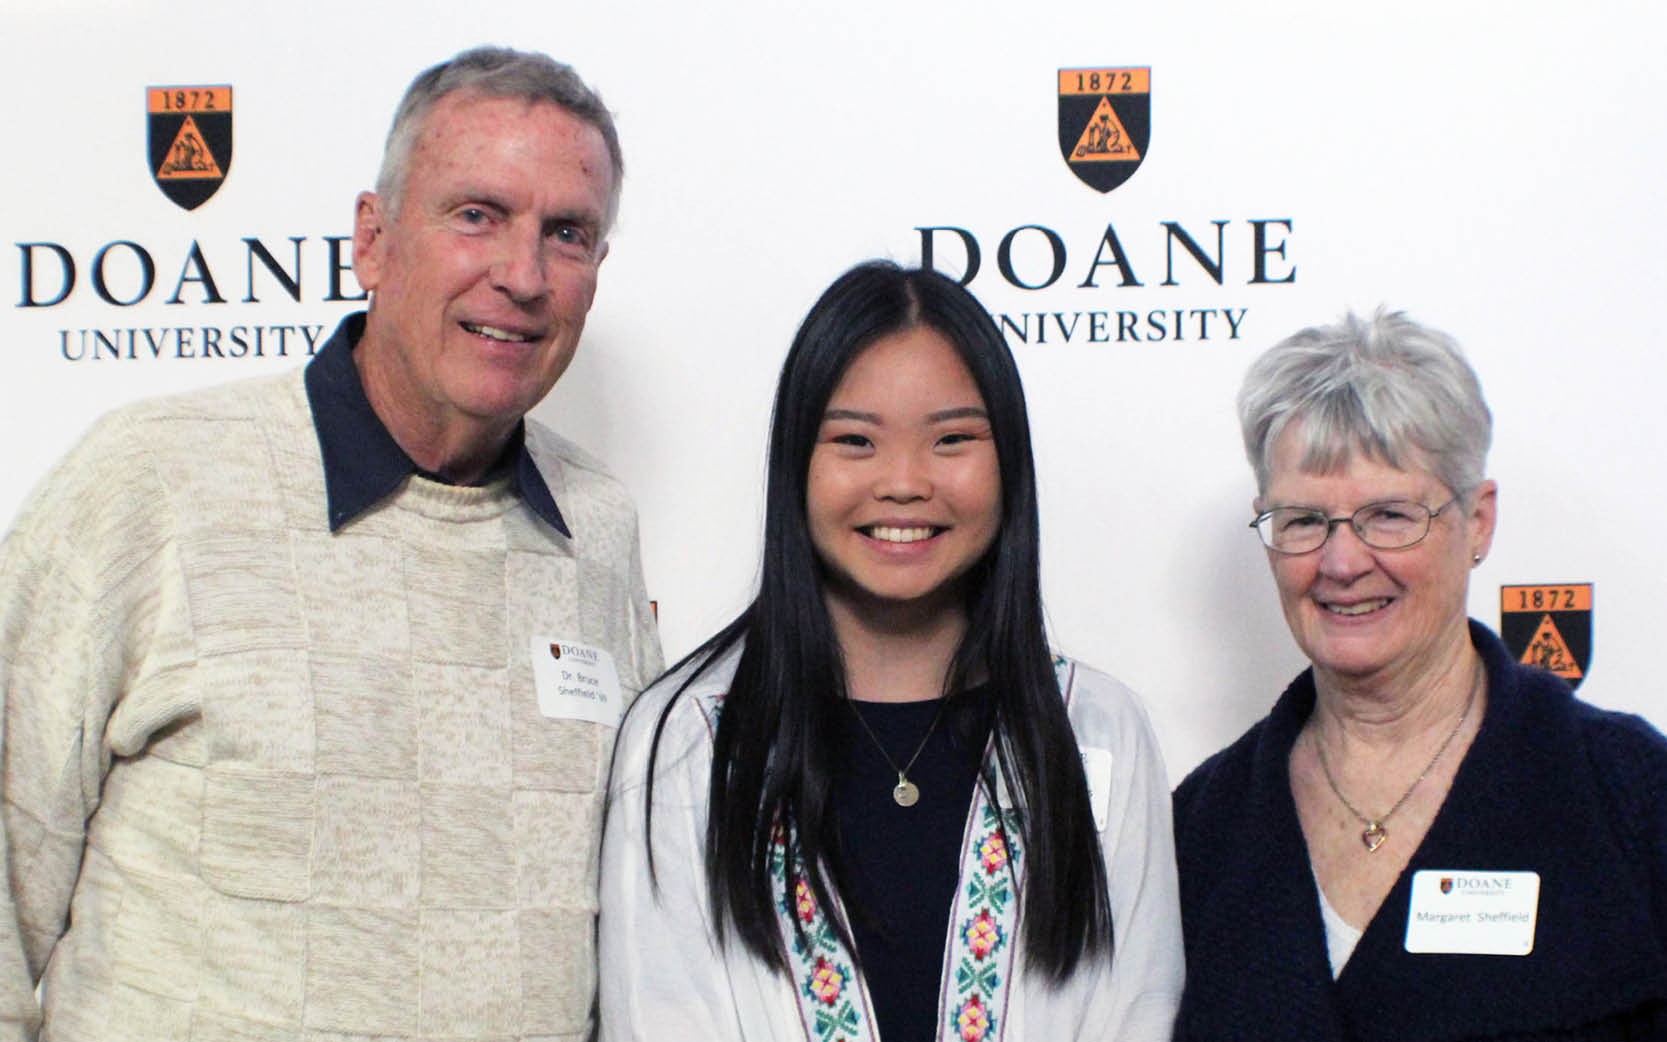 Group Photo of a family at a Doane Event